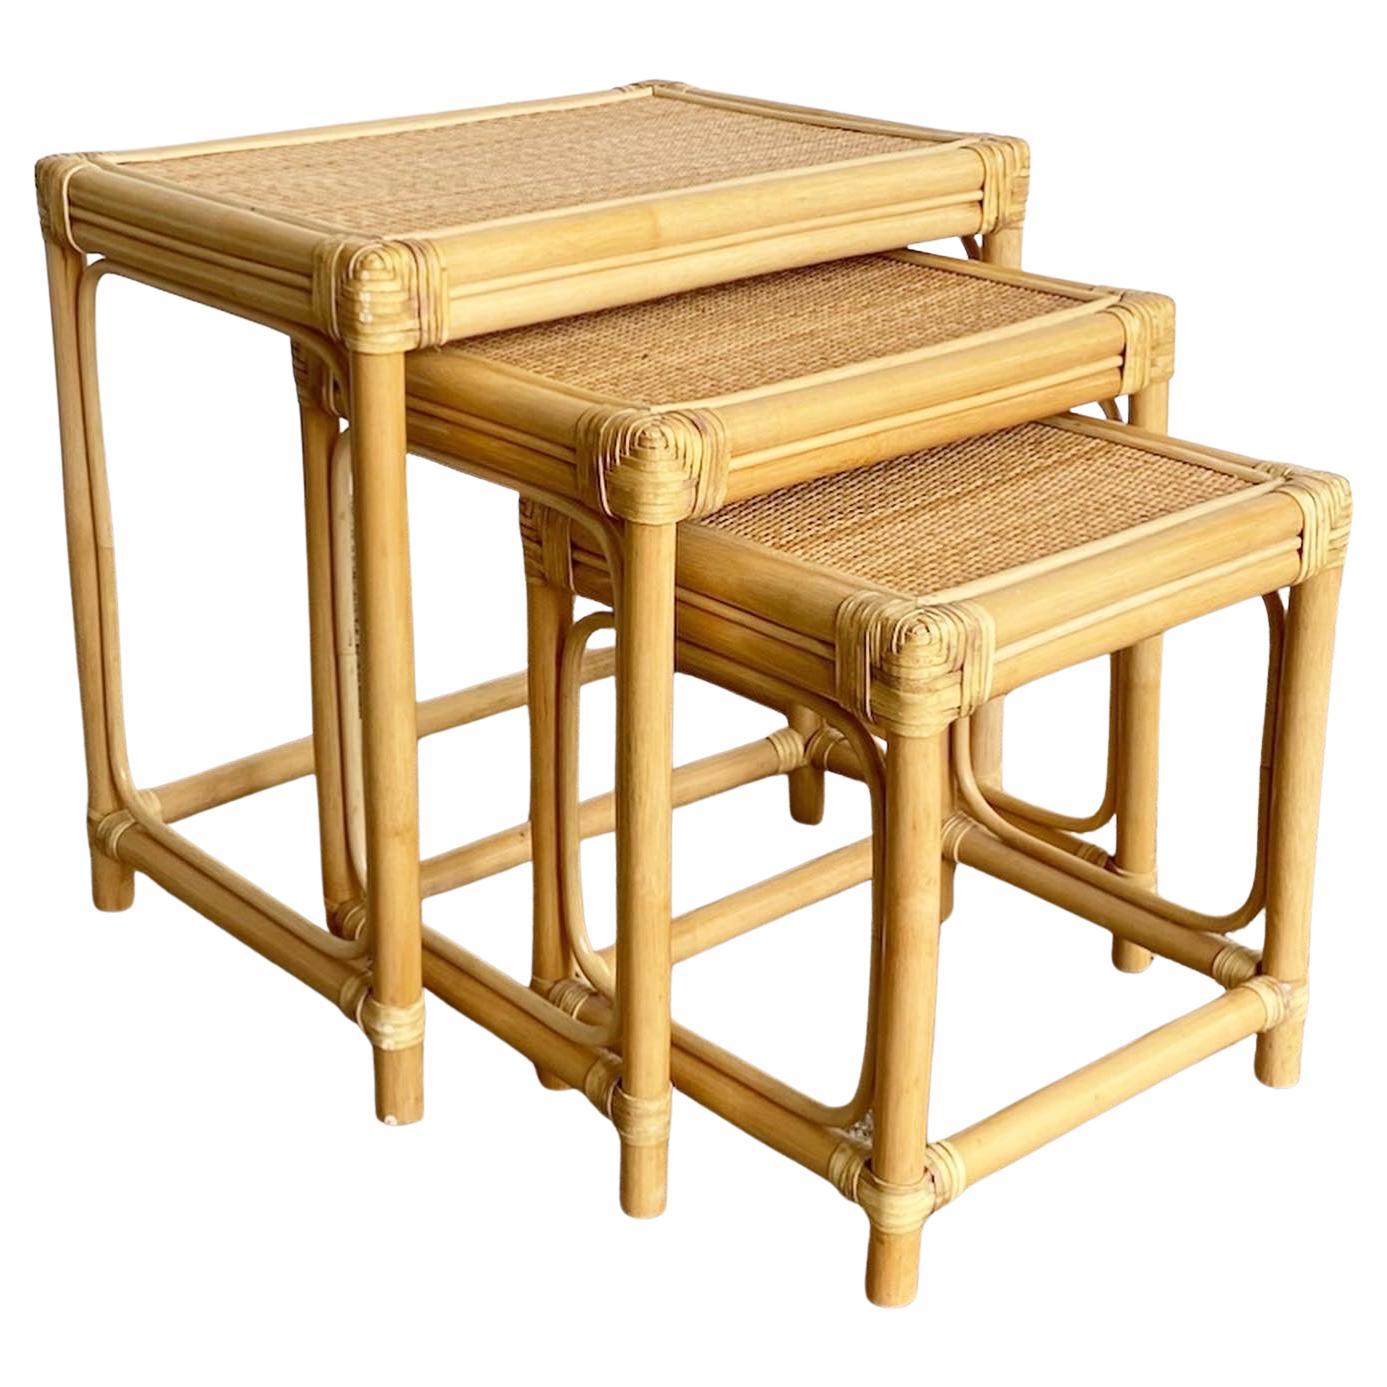 Boho Chic Bamboo Rattan and Wicker Nesting Tables, Set of 3